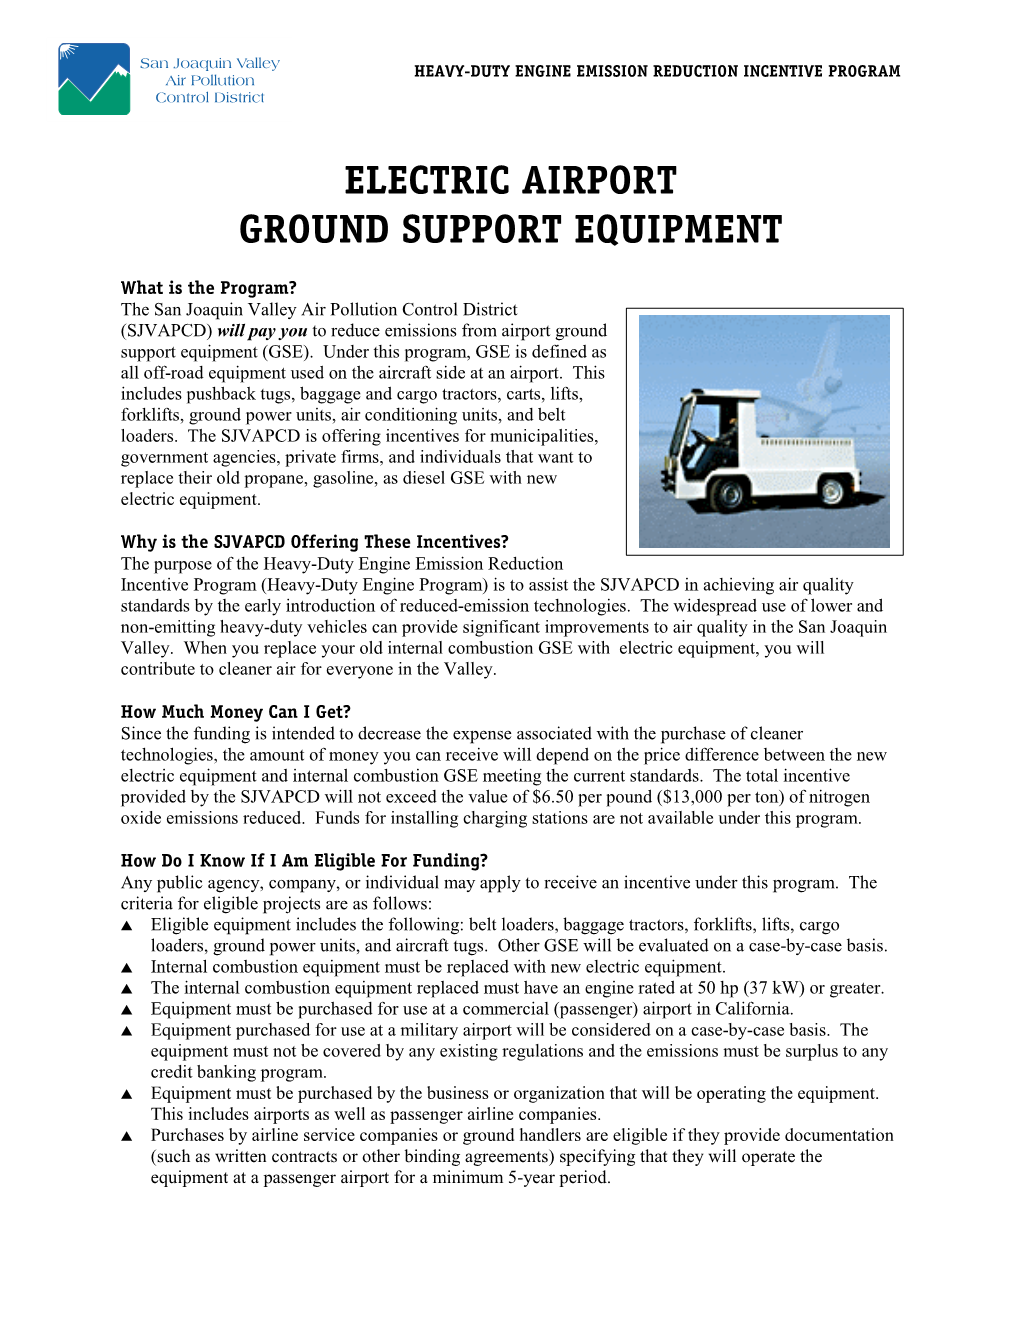 Electric Airport Ground Support Equipment